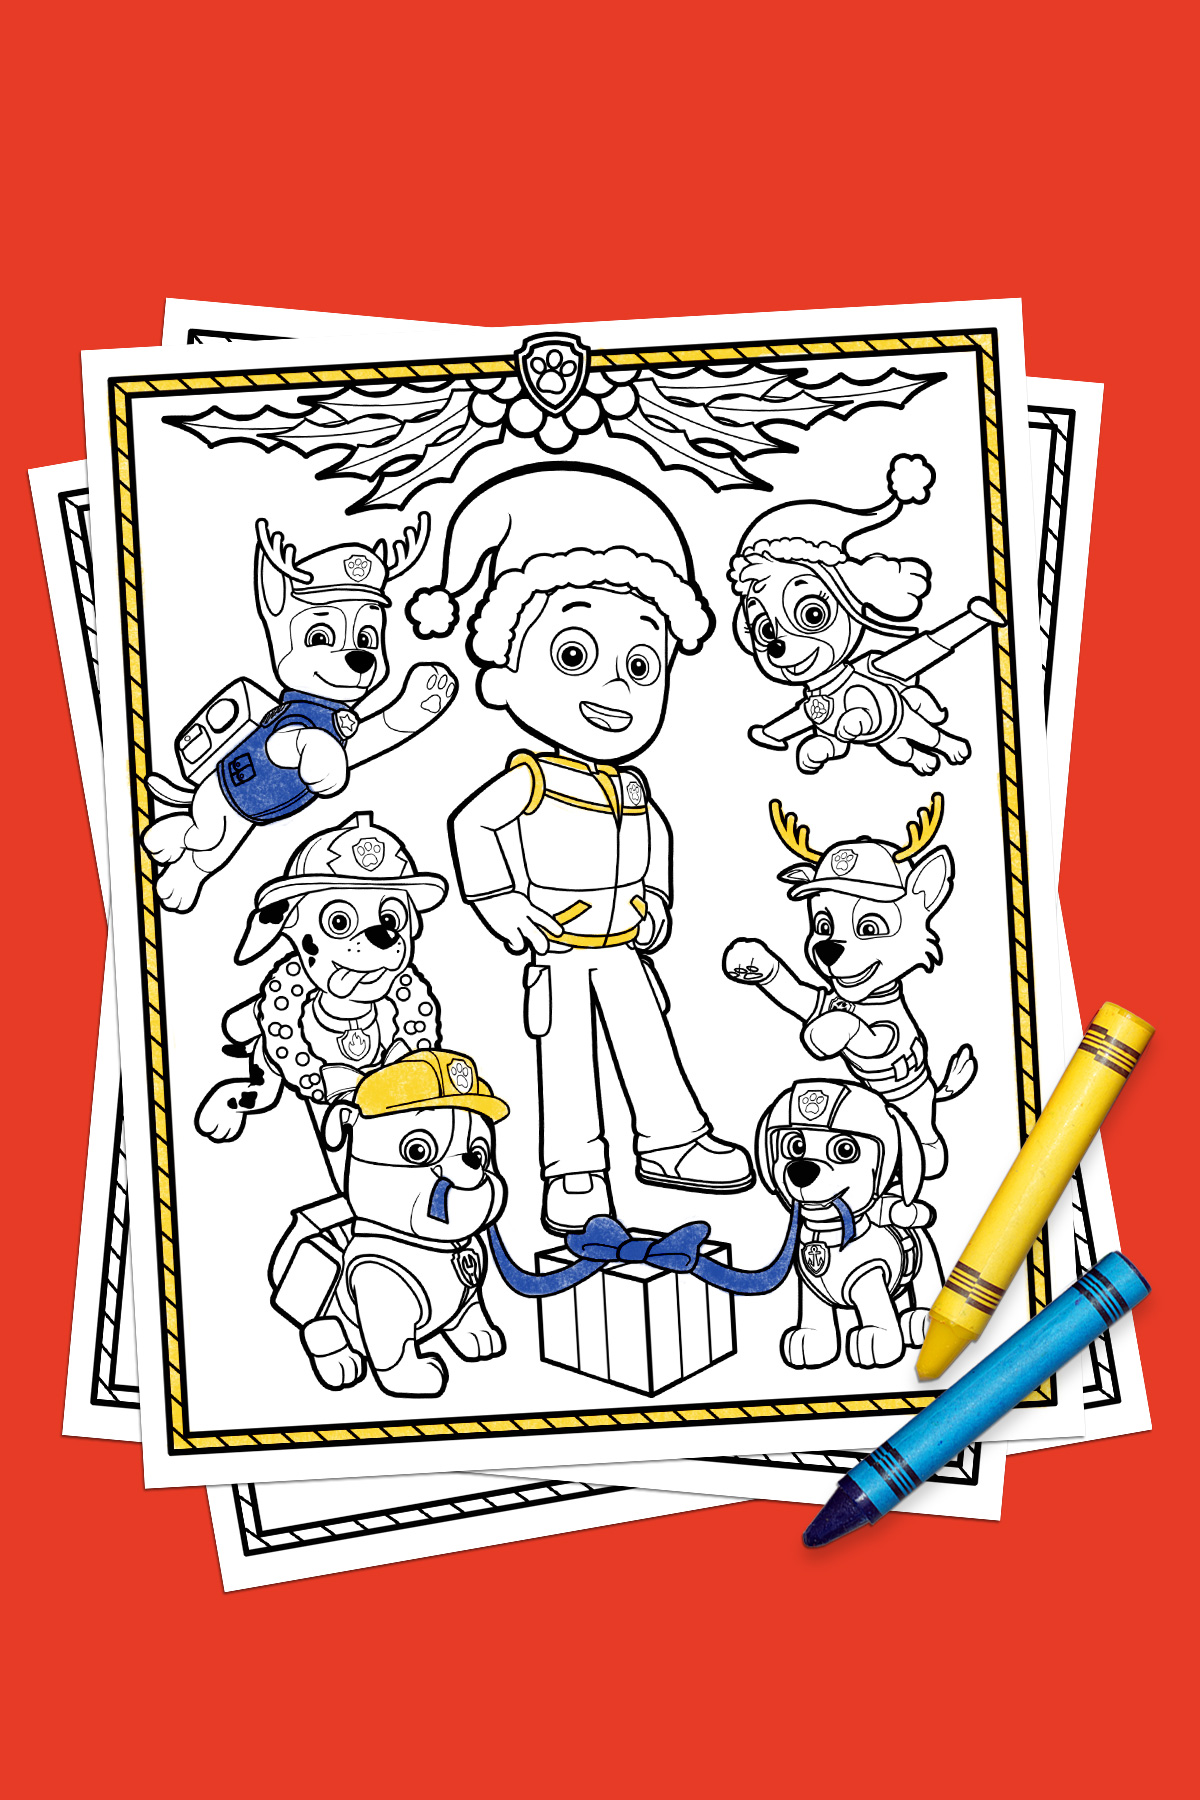 PAW Patrol Christmas Holiday Coloring Pack   Nickelodeon Parents